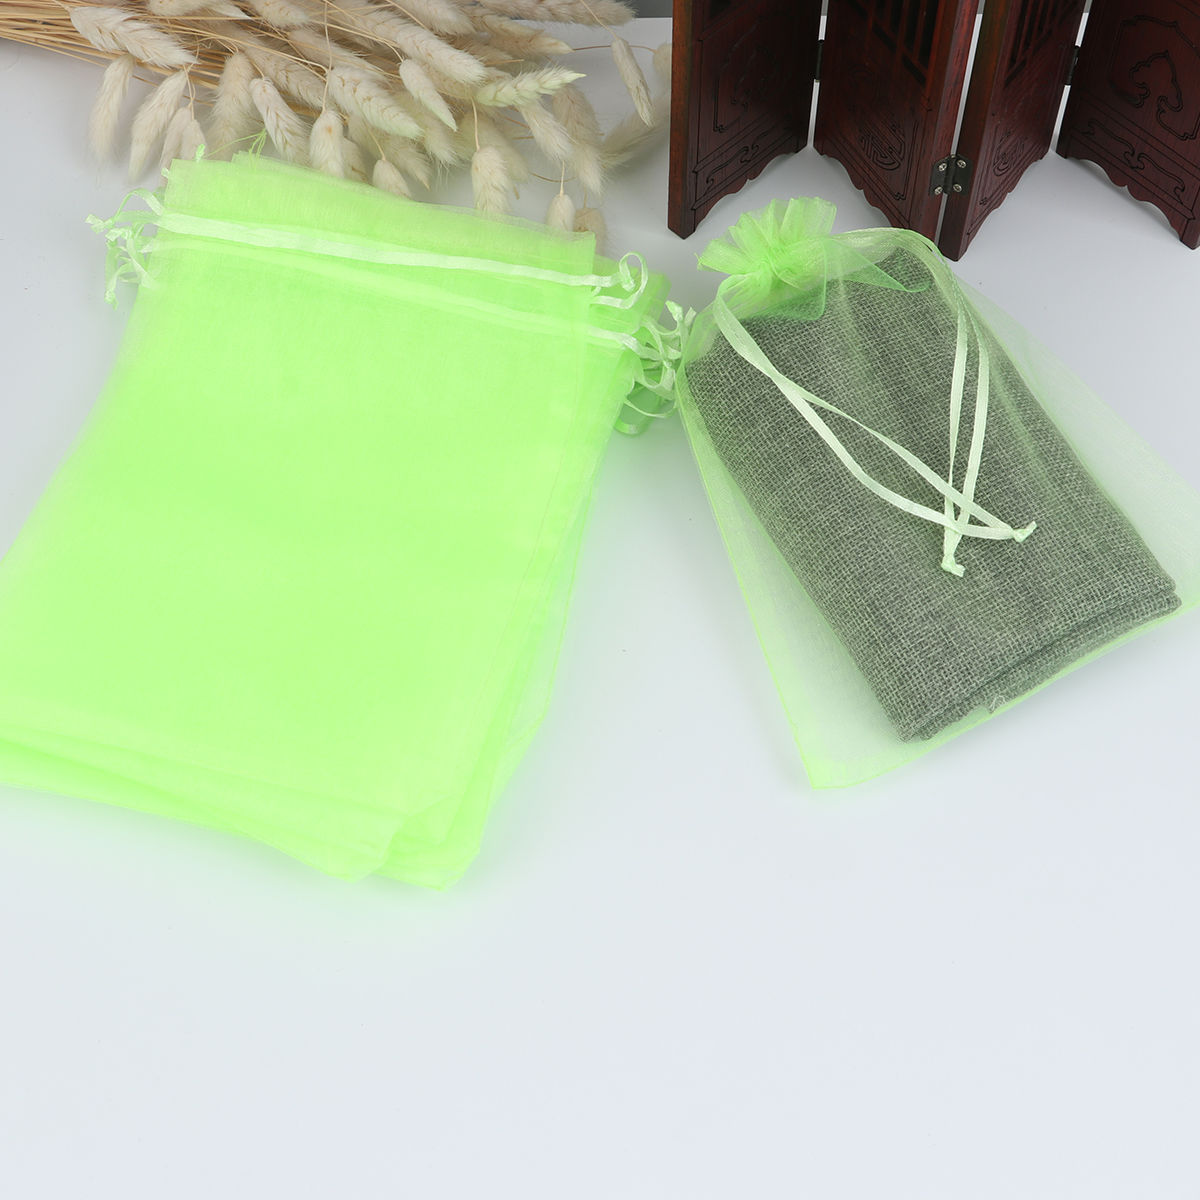 Picture of Wedding Gift Organza Jewelry Bags Drawstring Rectangle Fruit Green 20cm x15cm(7 7/8" x5 7/8"), (Usable Space: 17x14.5cm) 20 PCs